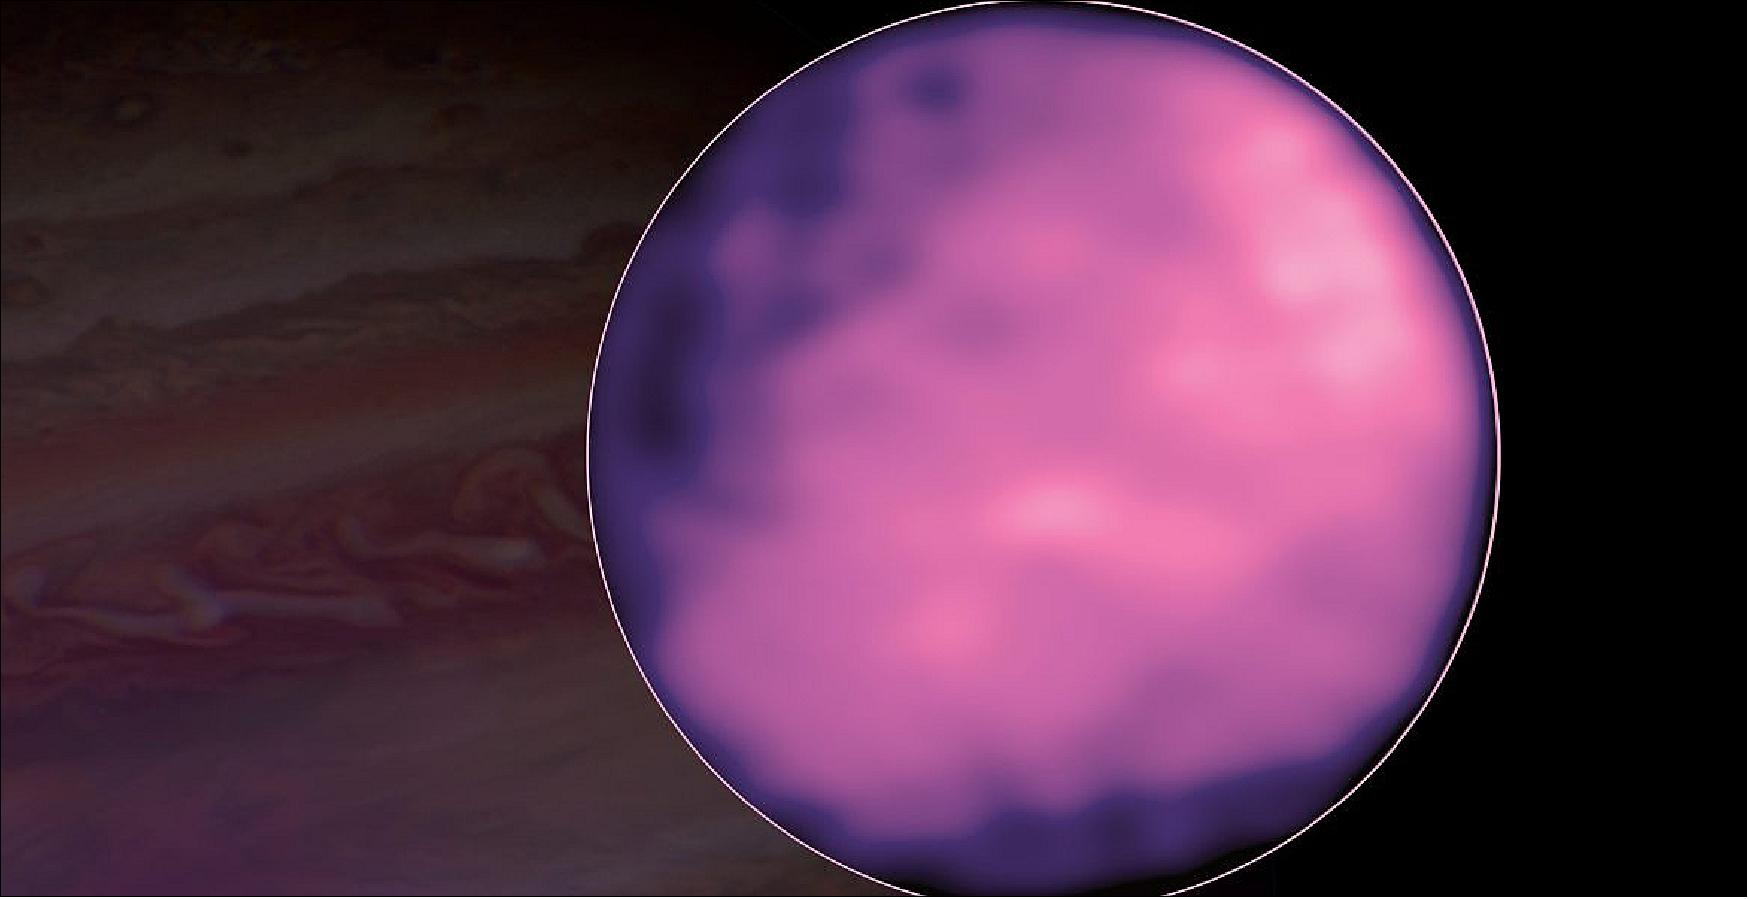 Figure 12: First spatially resolved, complete thermal data set of Jupiter's Icy Moon, Europa. ALMA was able to map out thermal variations on its surface. Hubble image of Jupiter in the background (image credit: ALMA (ESO/NAOJ/NRAO), S. Trumbo et al.; NRAO/AUI NSF, S. Dagnello; NASA/Hubble)